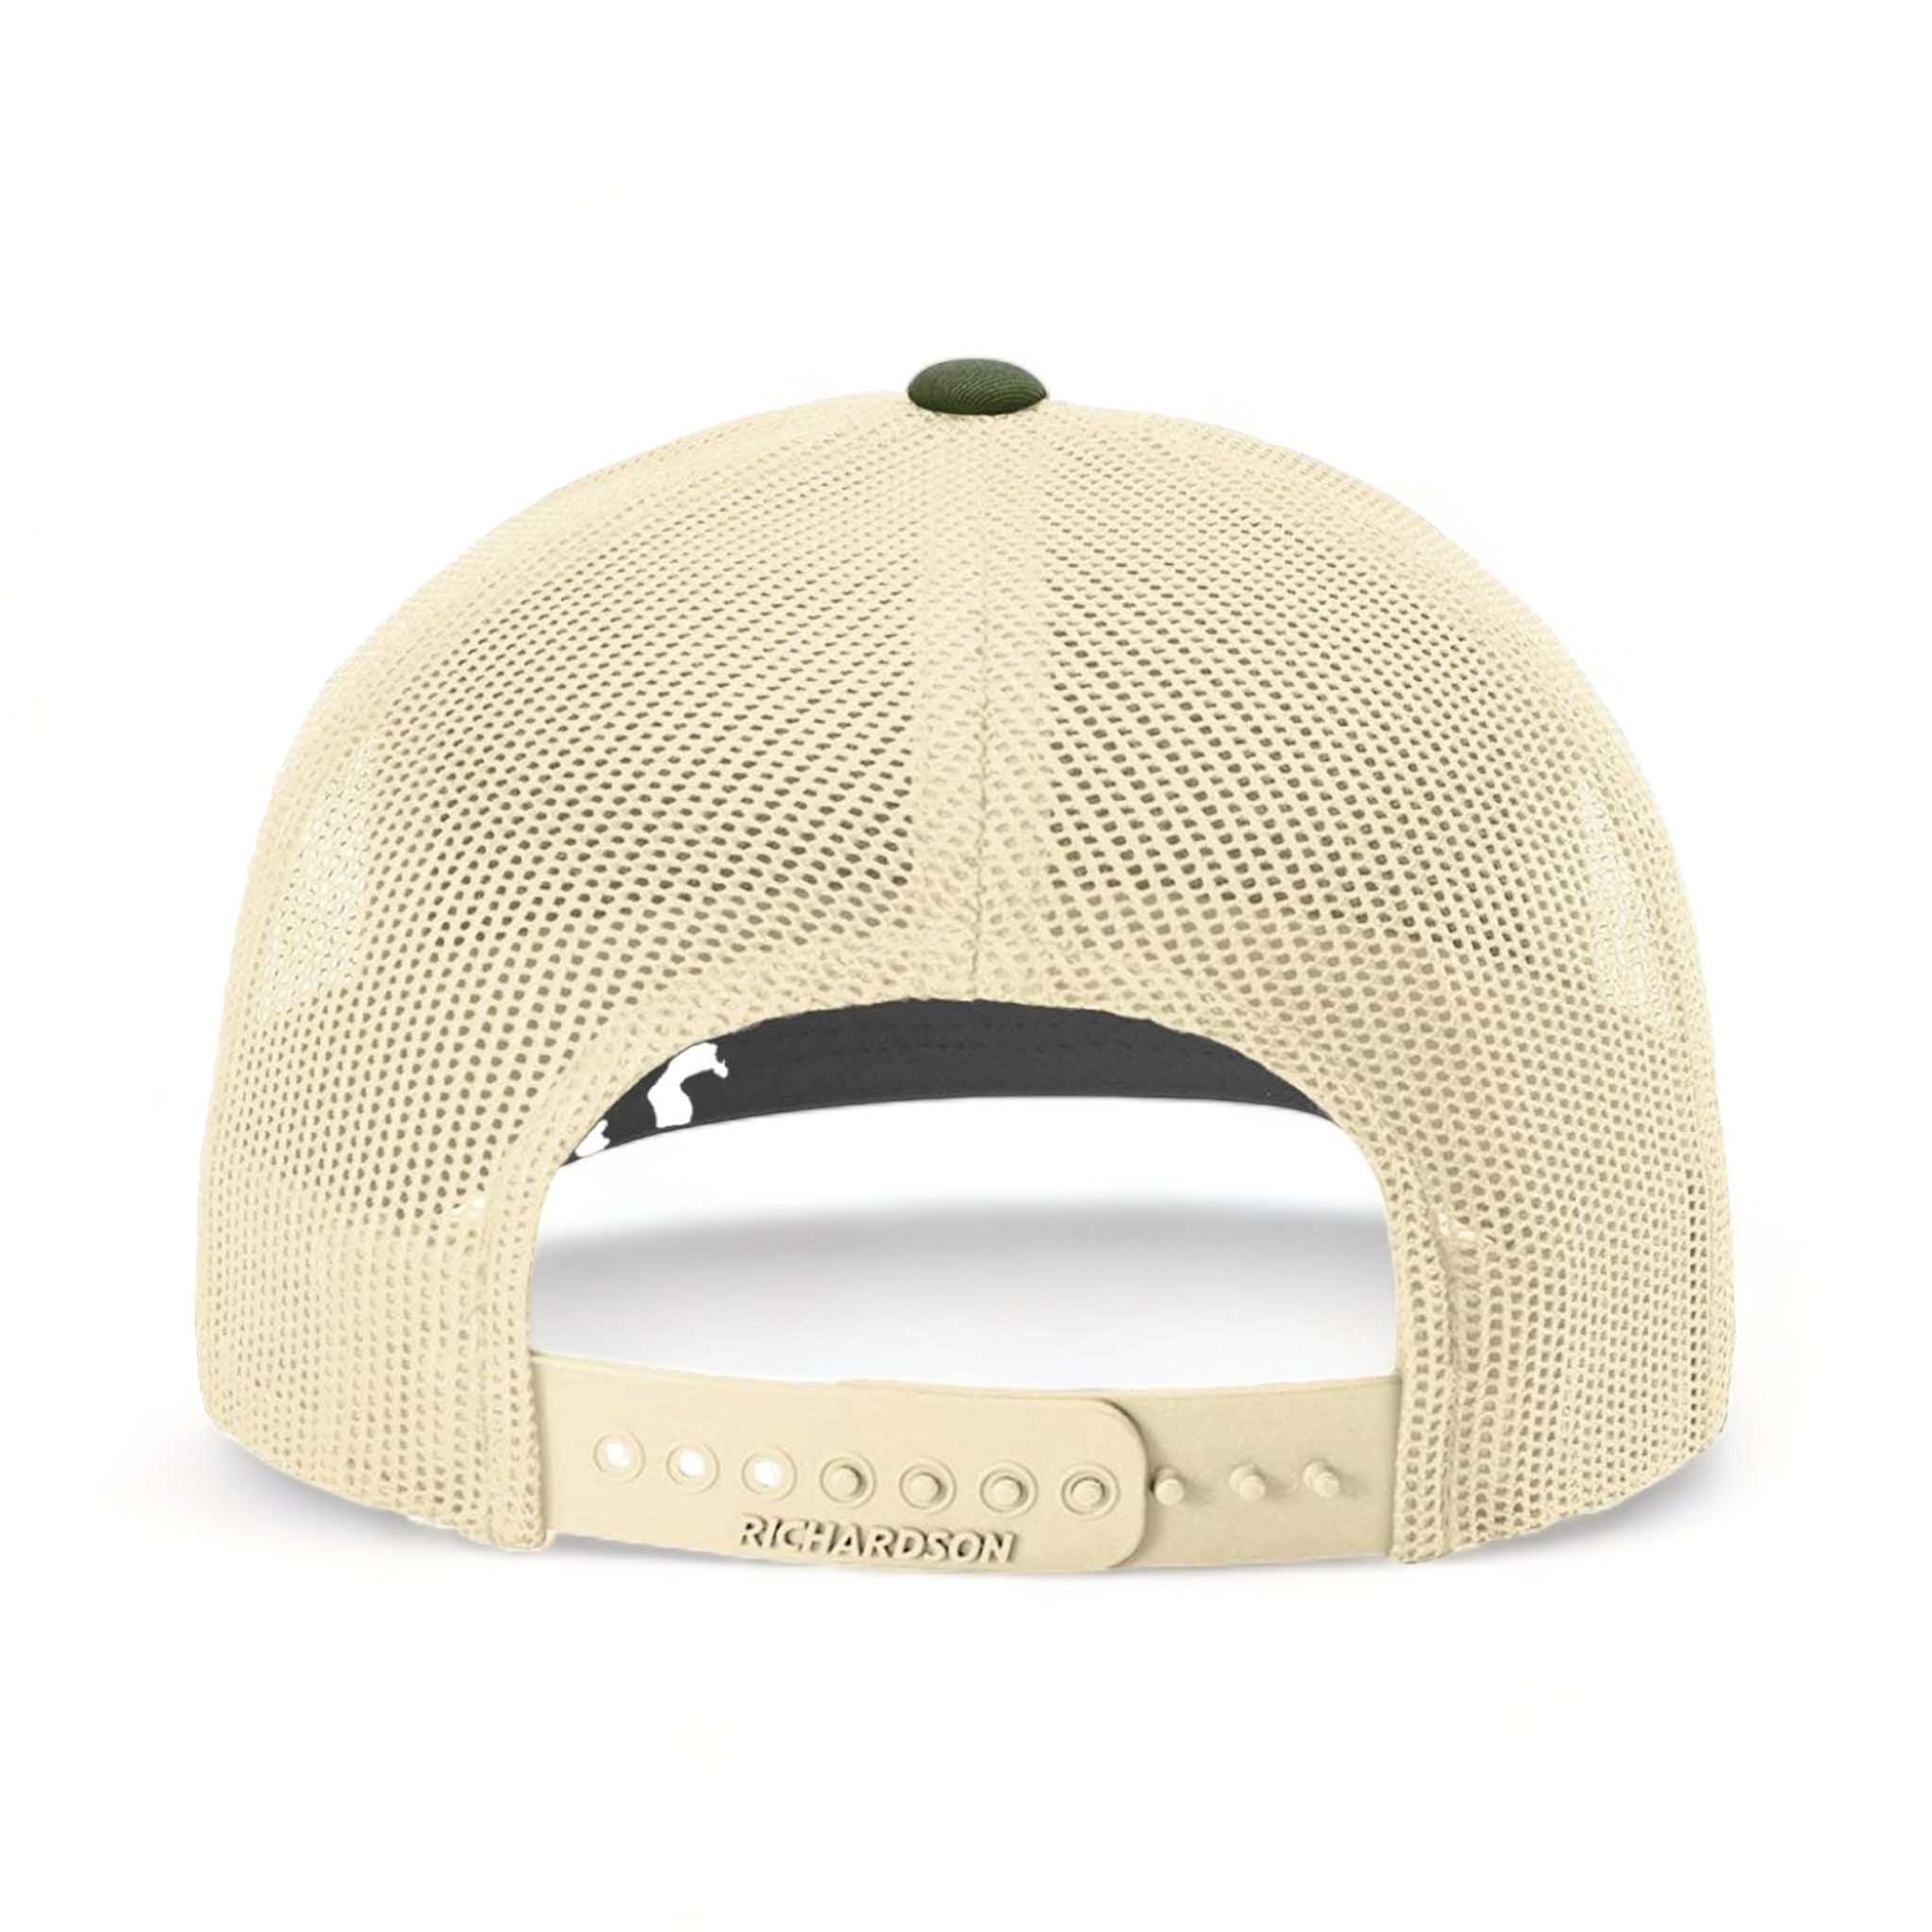 Back view of Richardson 112 custom hat in heather grey, birch and army olive